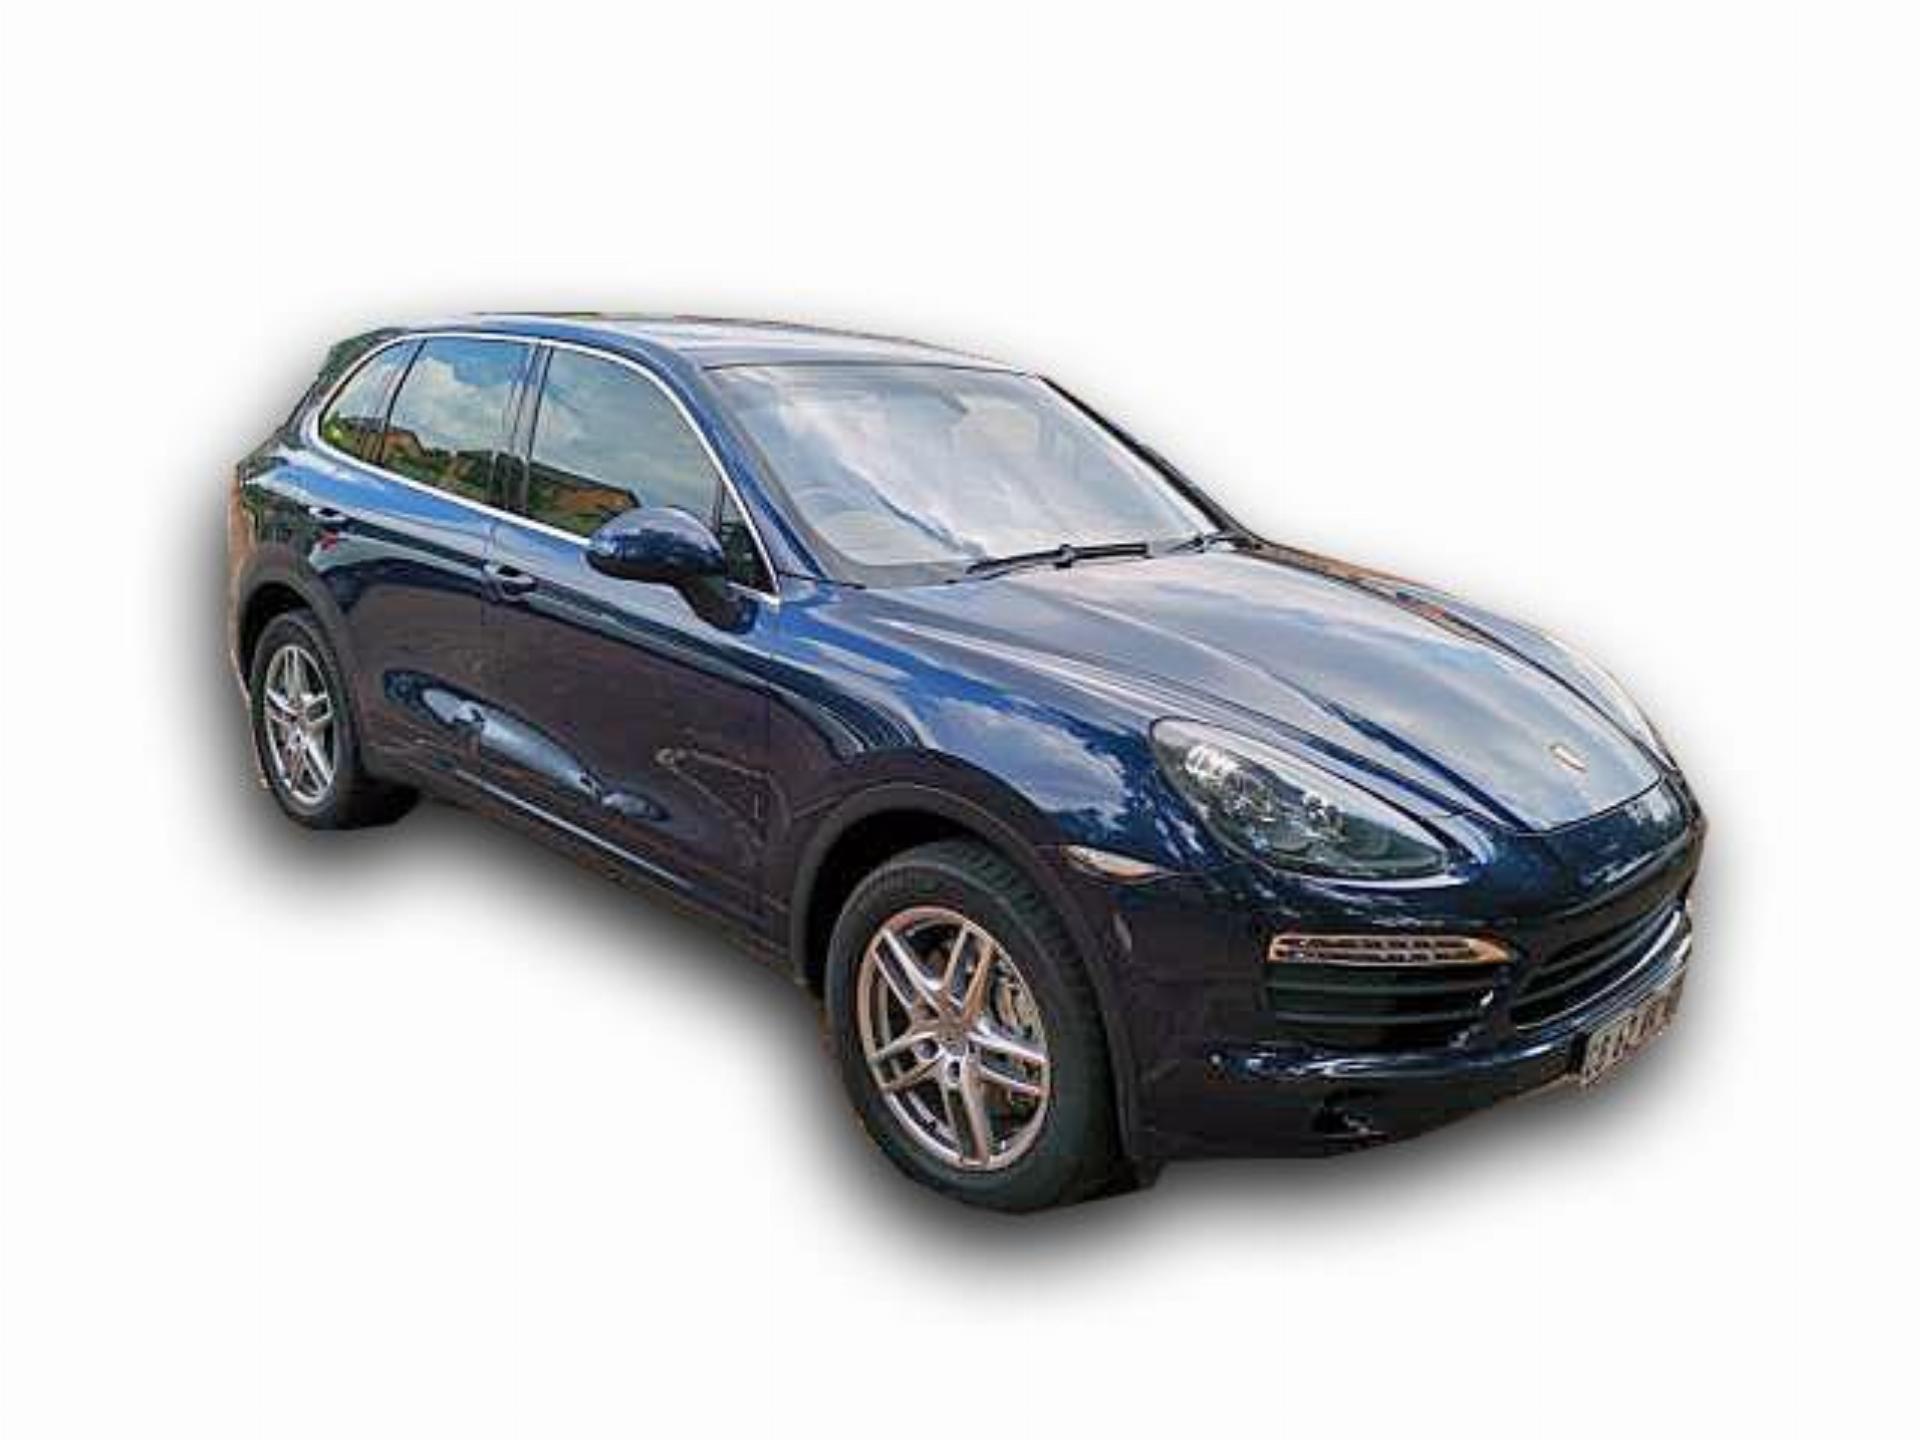 Used Porsche Cayenne S PDK Immaculate 2012 on auction